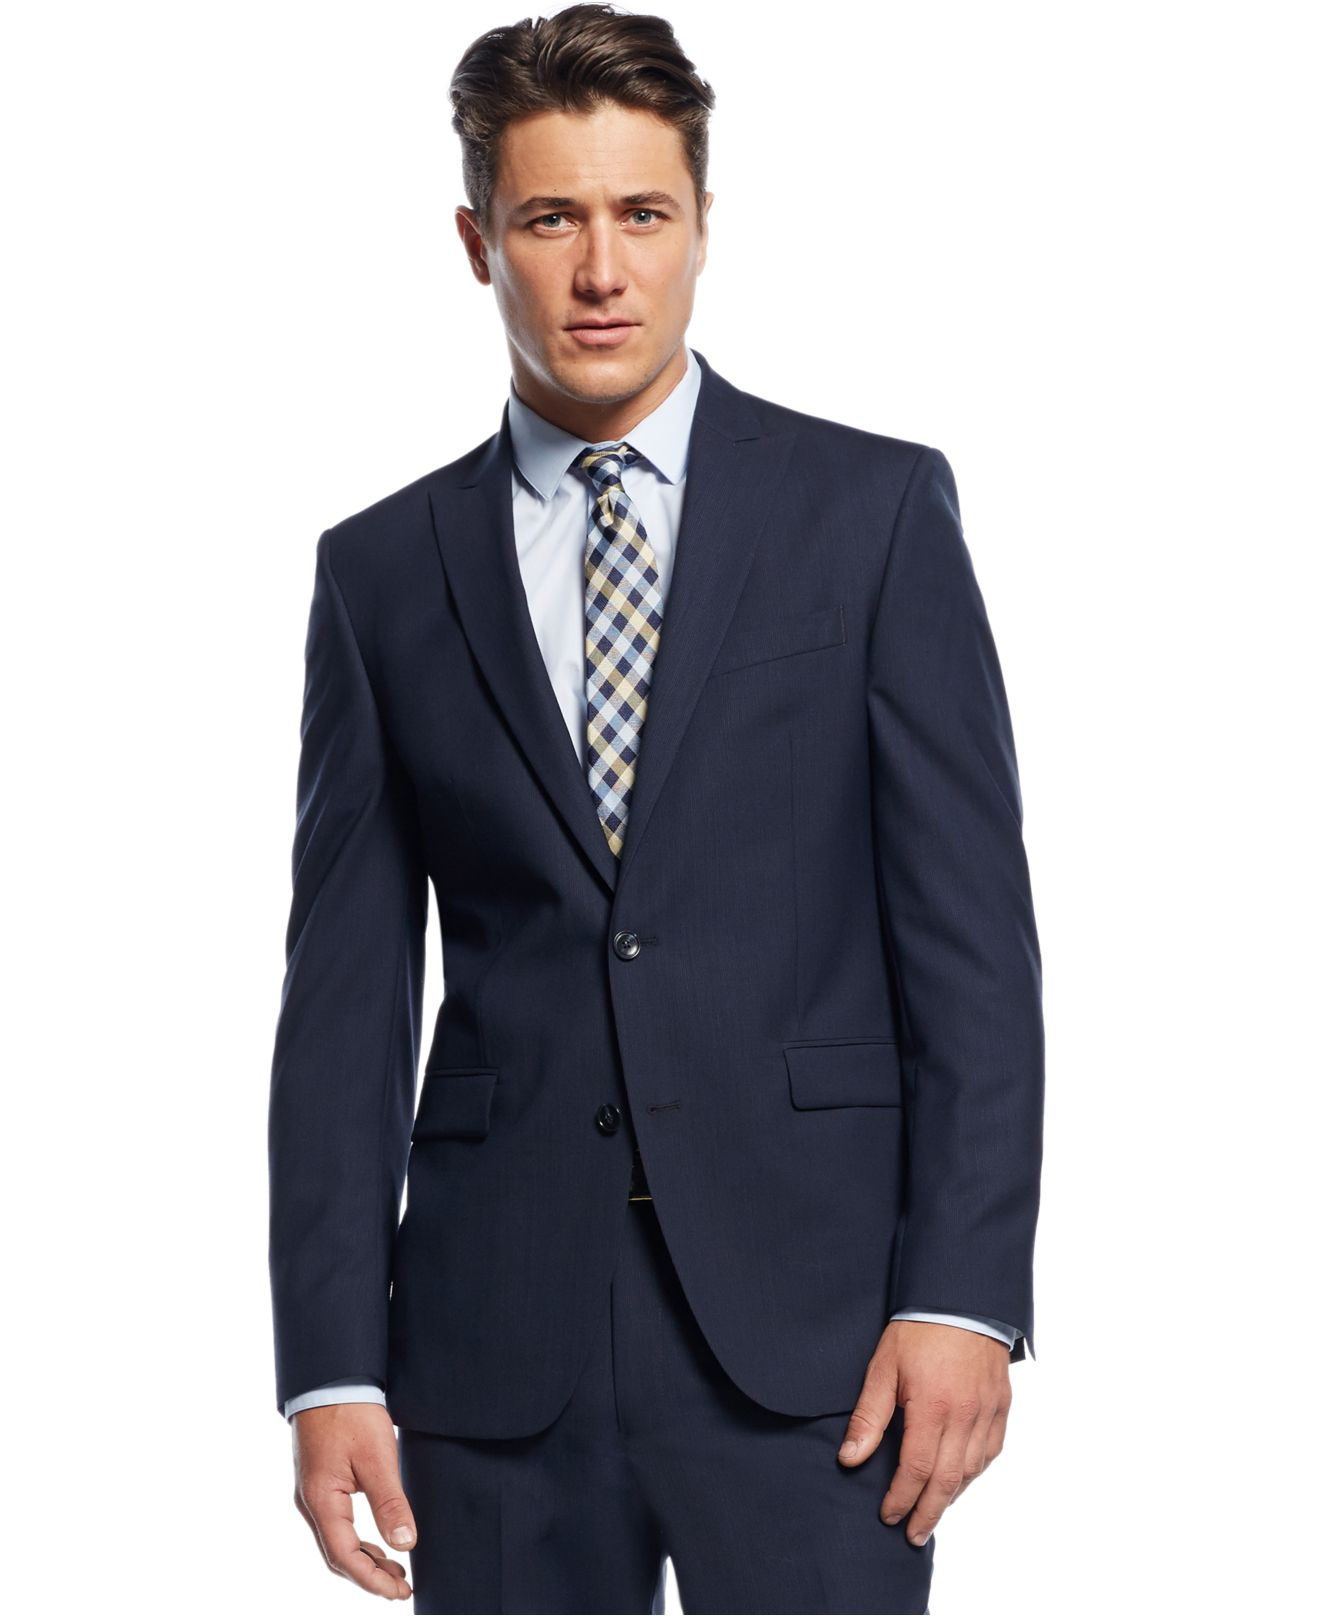 Lyst - Kenneth Cole Slim-fit Blue Pinstriped Suit in Blue for Men